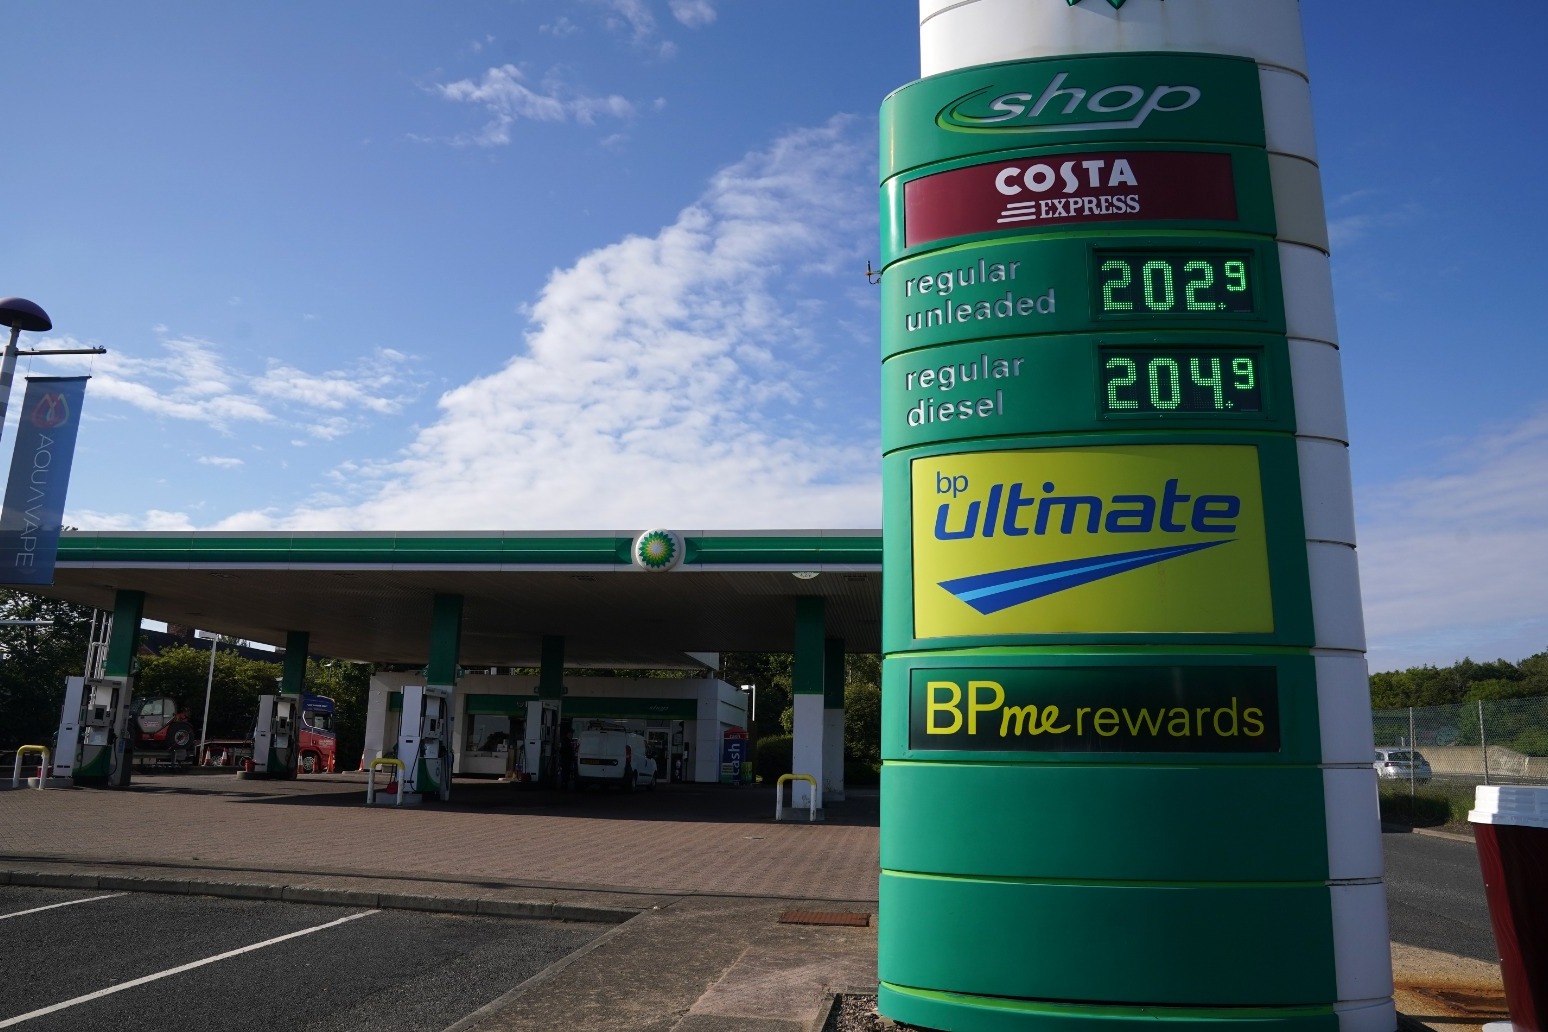 Average cost of filling family car with petrol set to hit 100